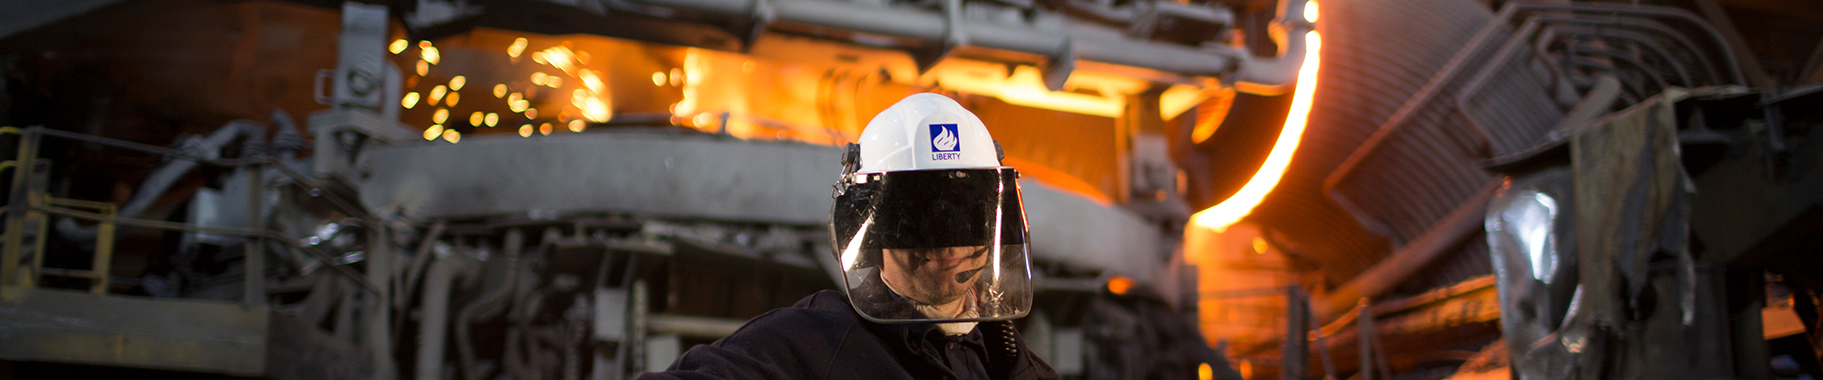 LIBERTY Steel Group makes an offer to acquire thyssenkrupp Steel Europe